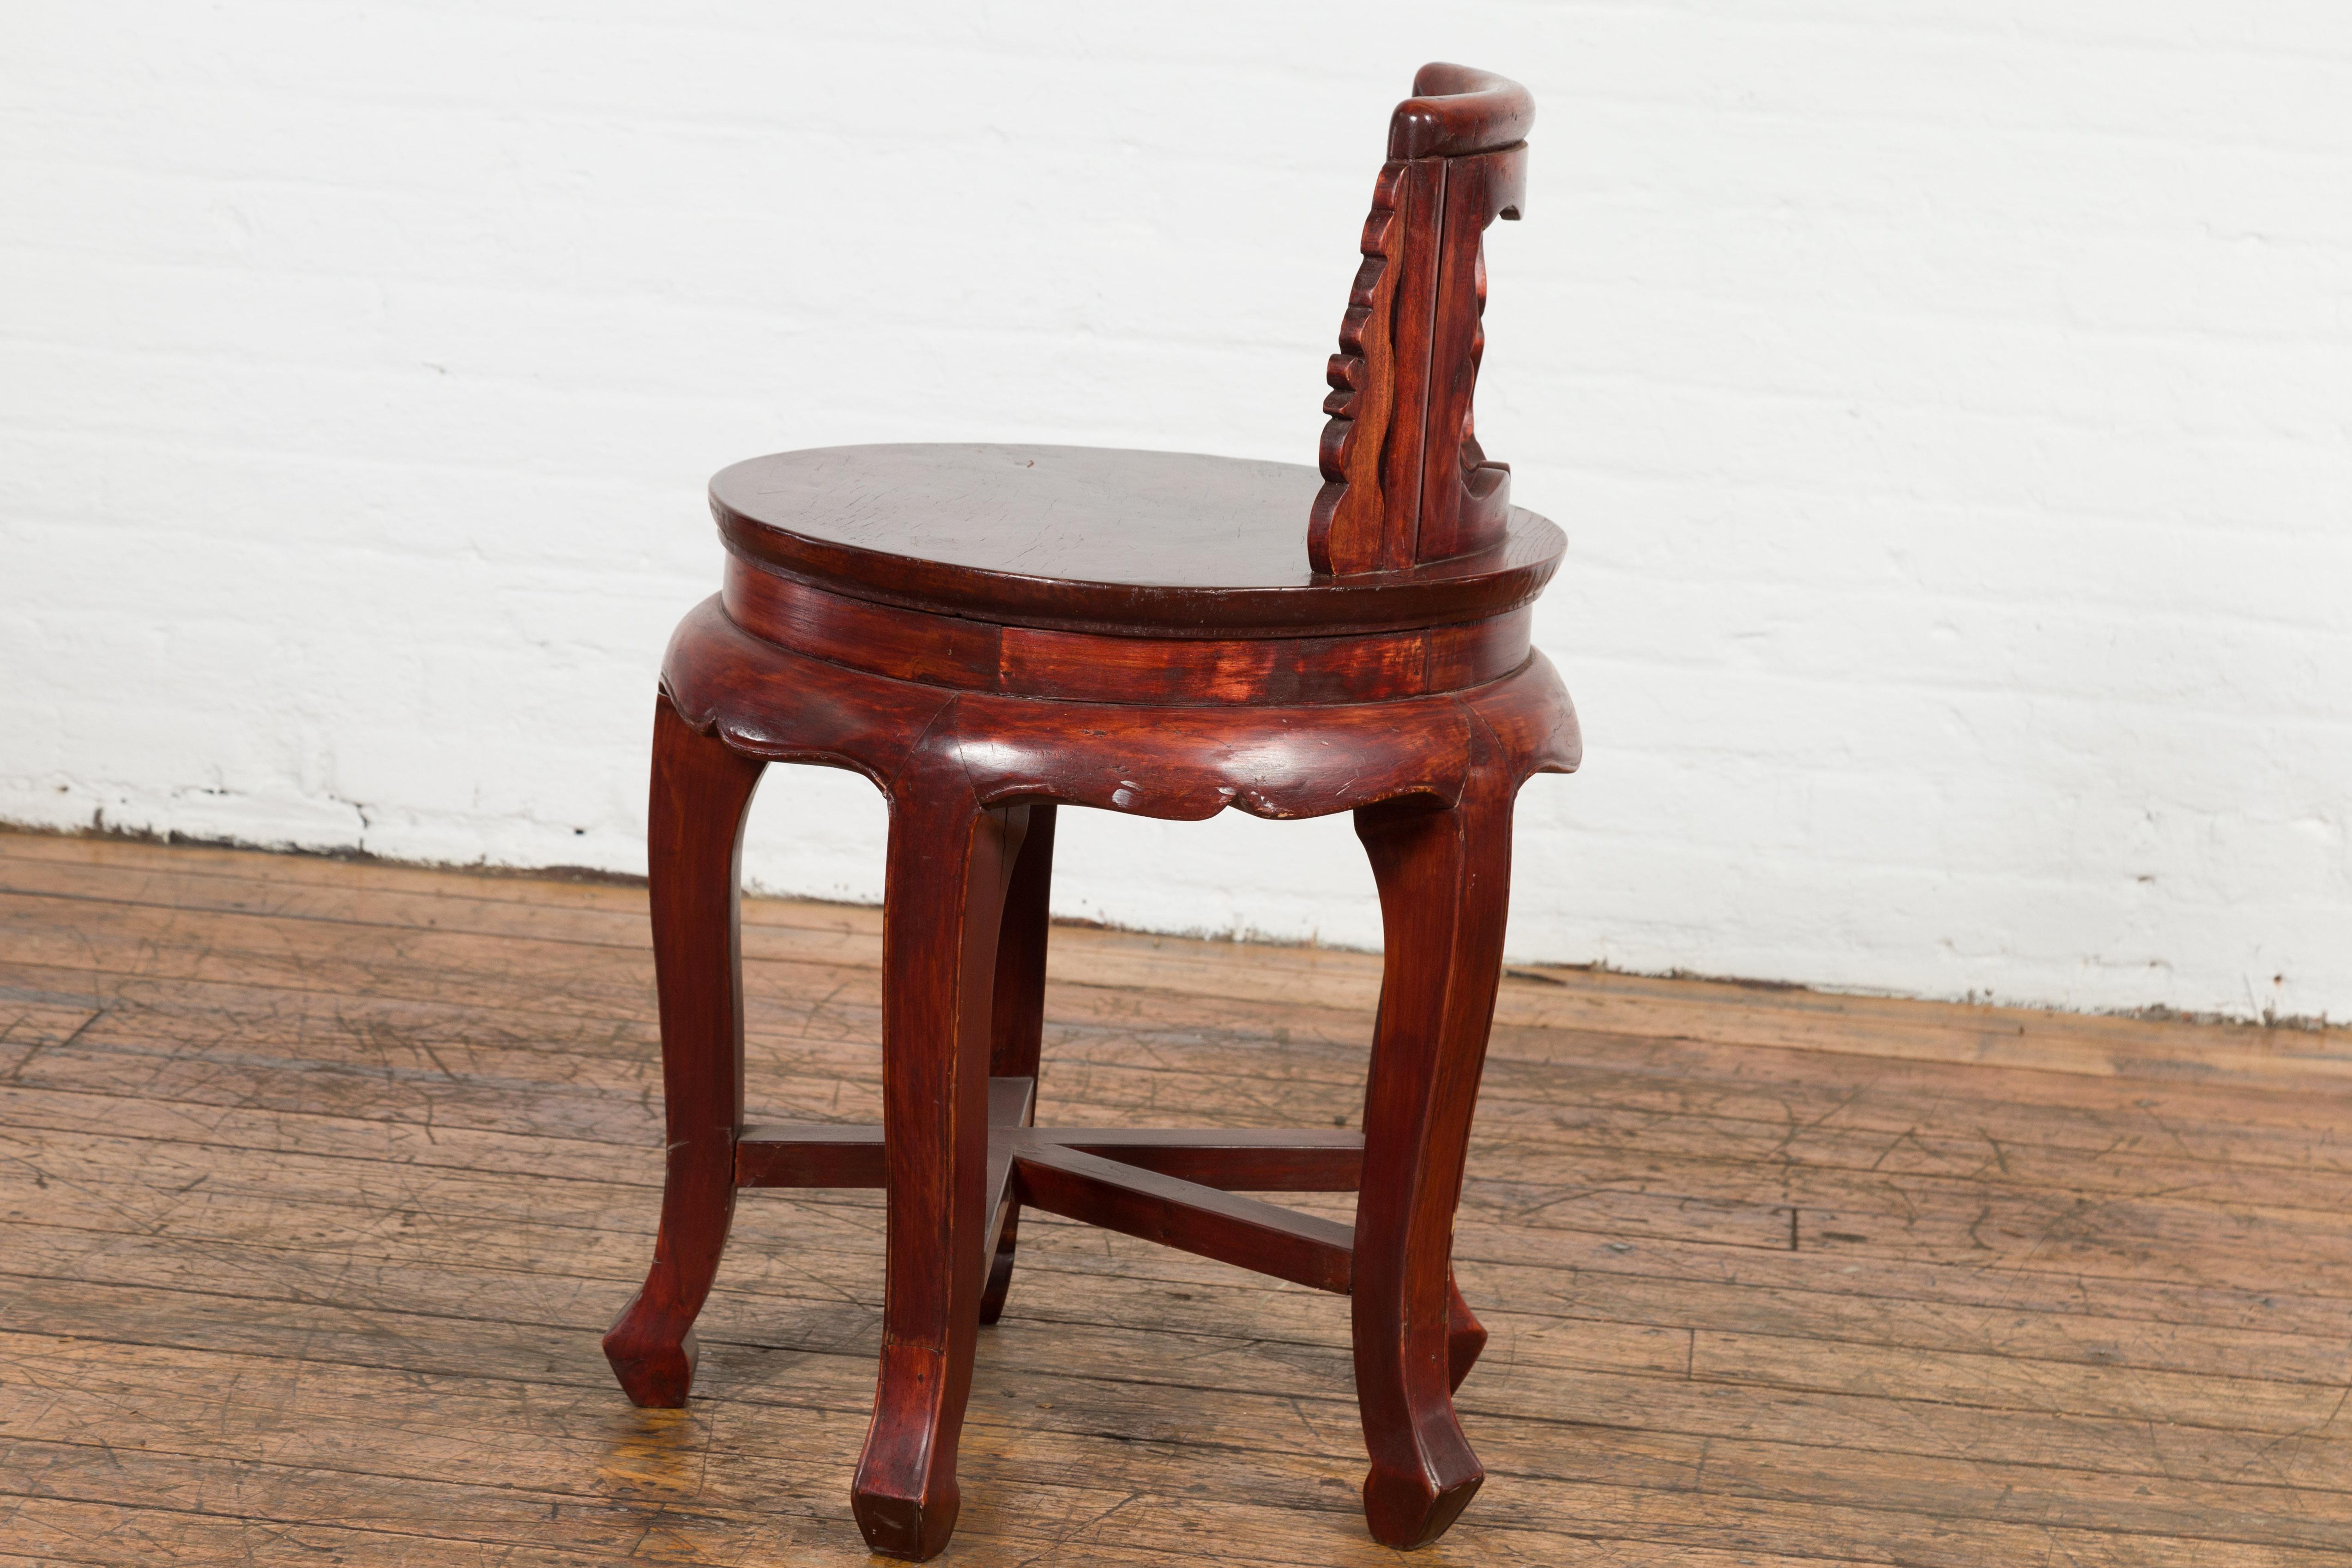 Chinese Late Qing Dynasty Diminutive Chair with Carved Back and Curving Legs For Sale 11